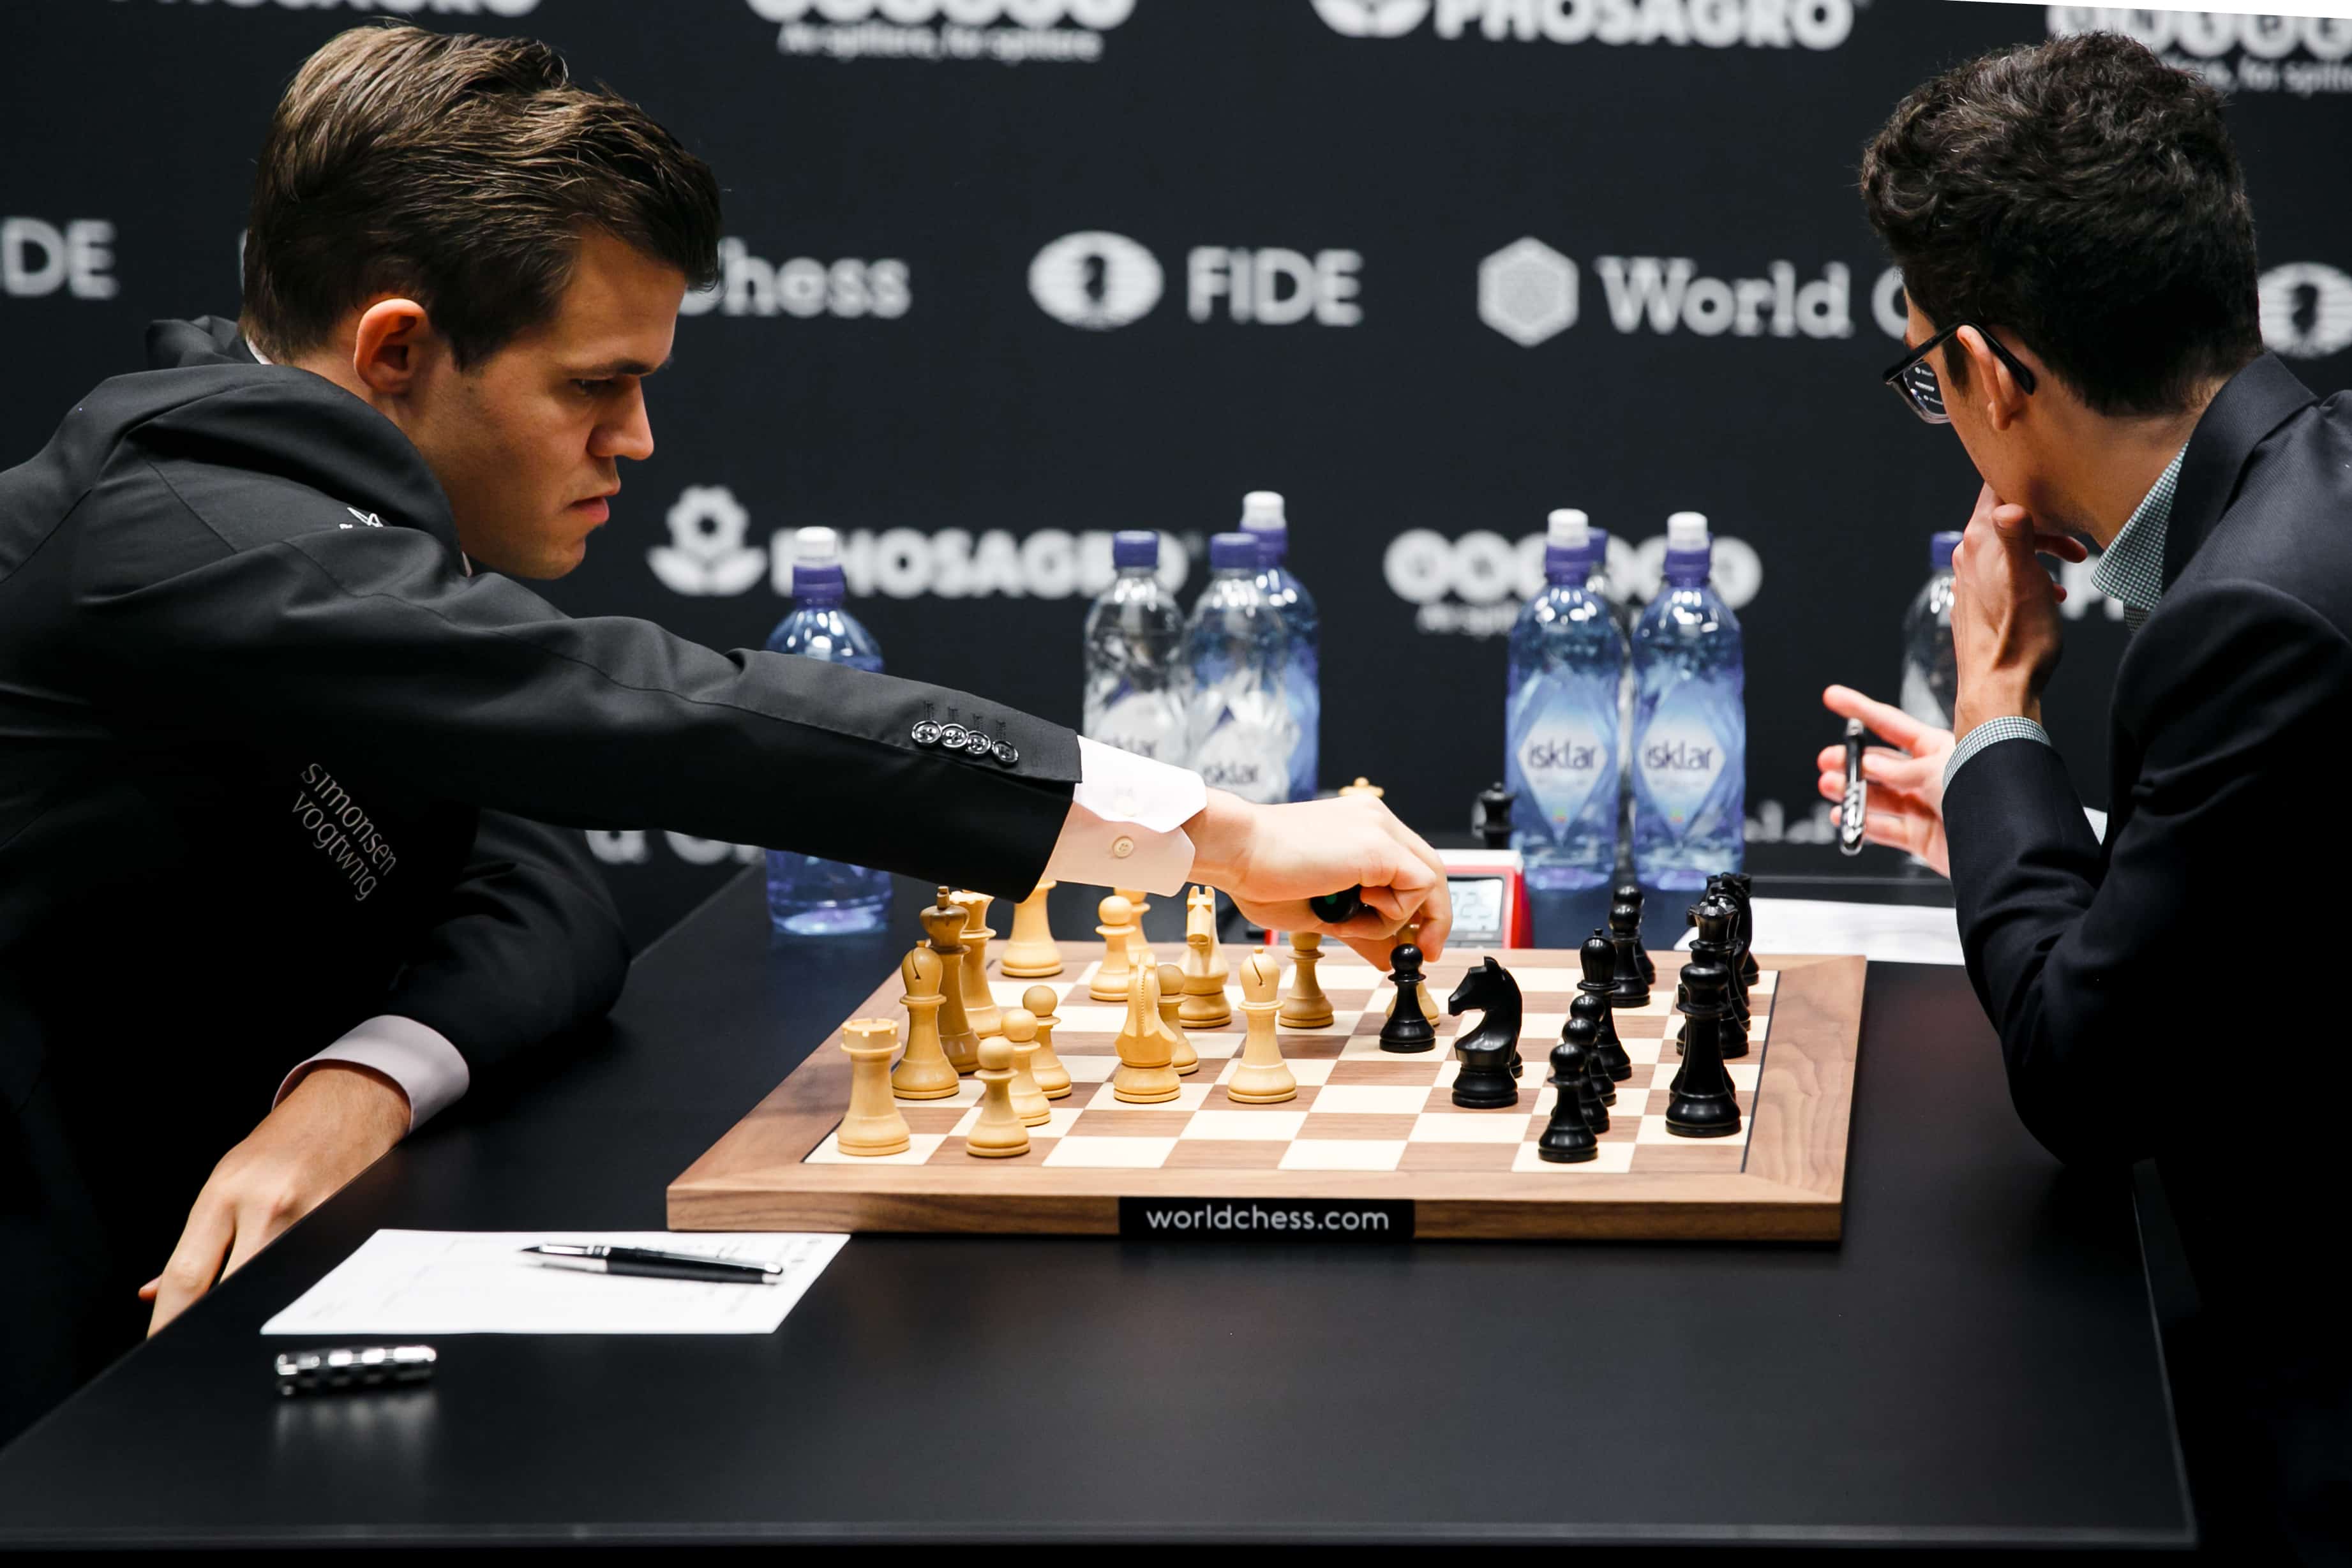 Fabiano Caruana misses great chance to beat Magnus Carlsen in game 6 of  World Chess Championship